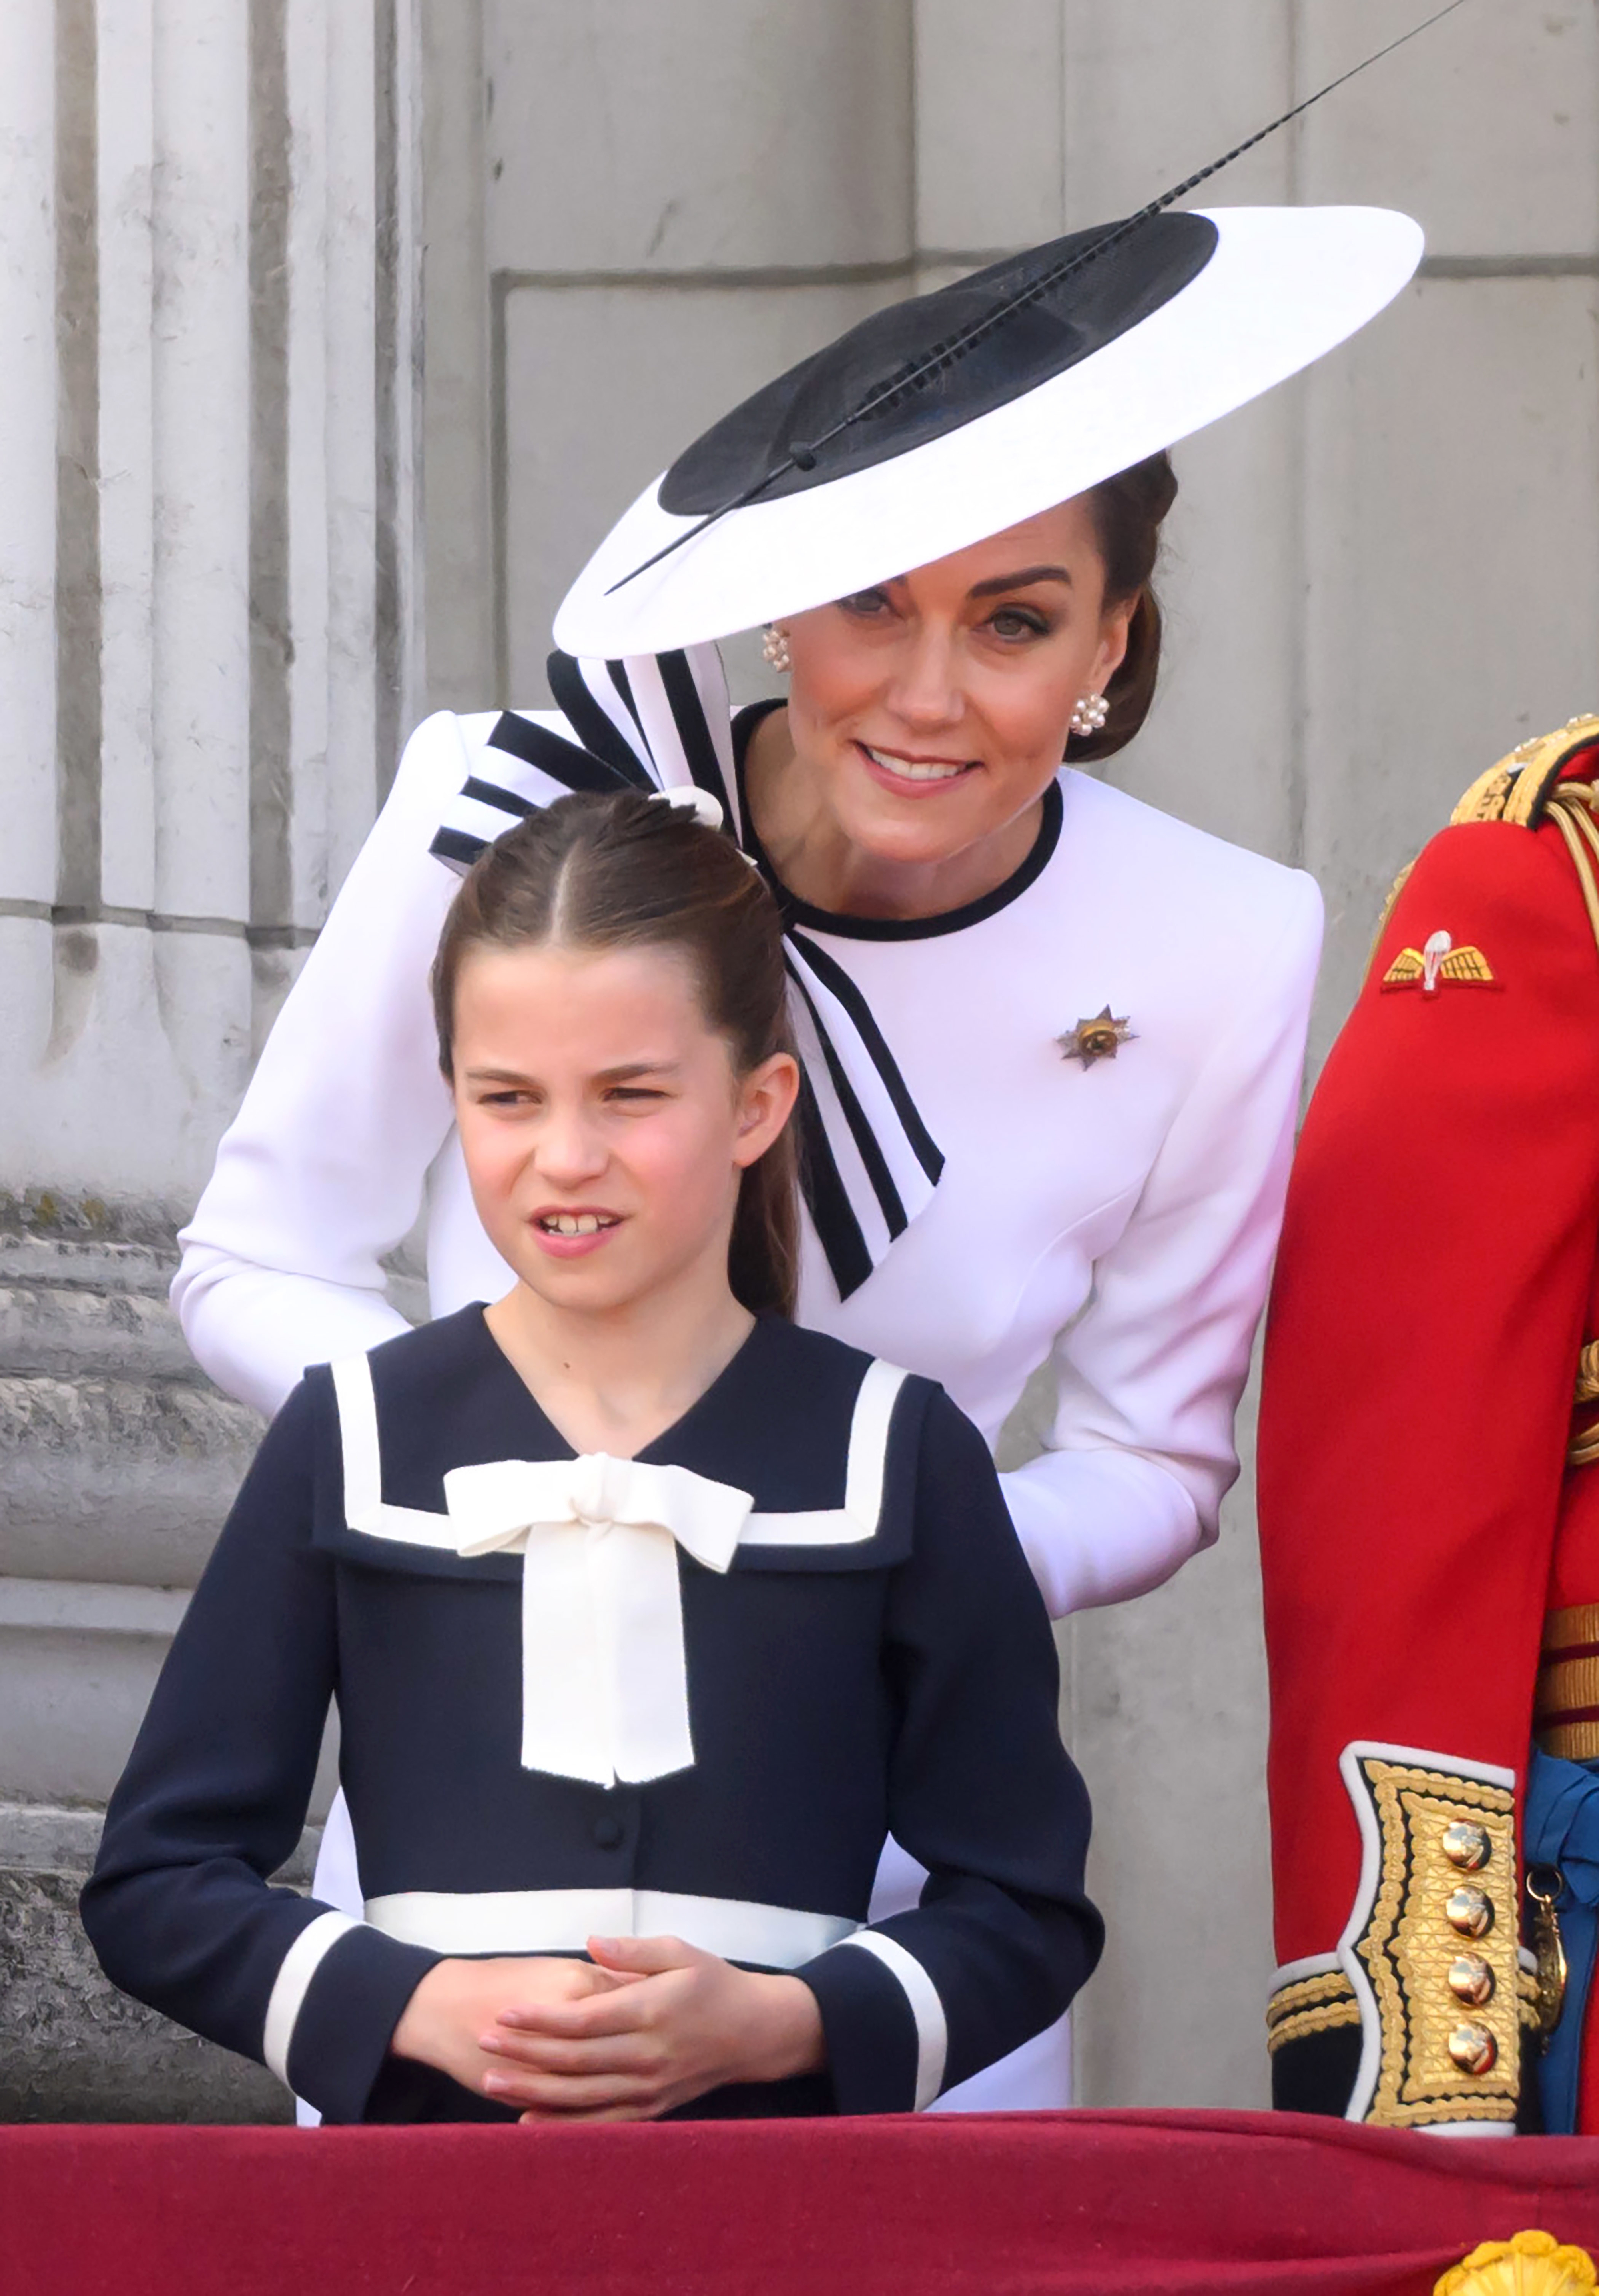 Princess Charlotte, in a navy outfit with a bow, accompanied by Catherine, Duchess of Cambridge, in a dress with a large hat, at an outdoor event